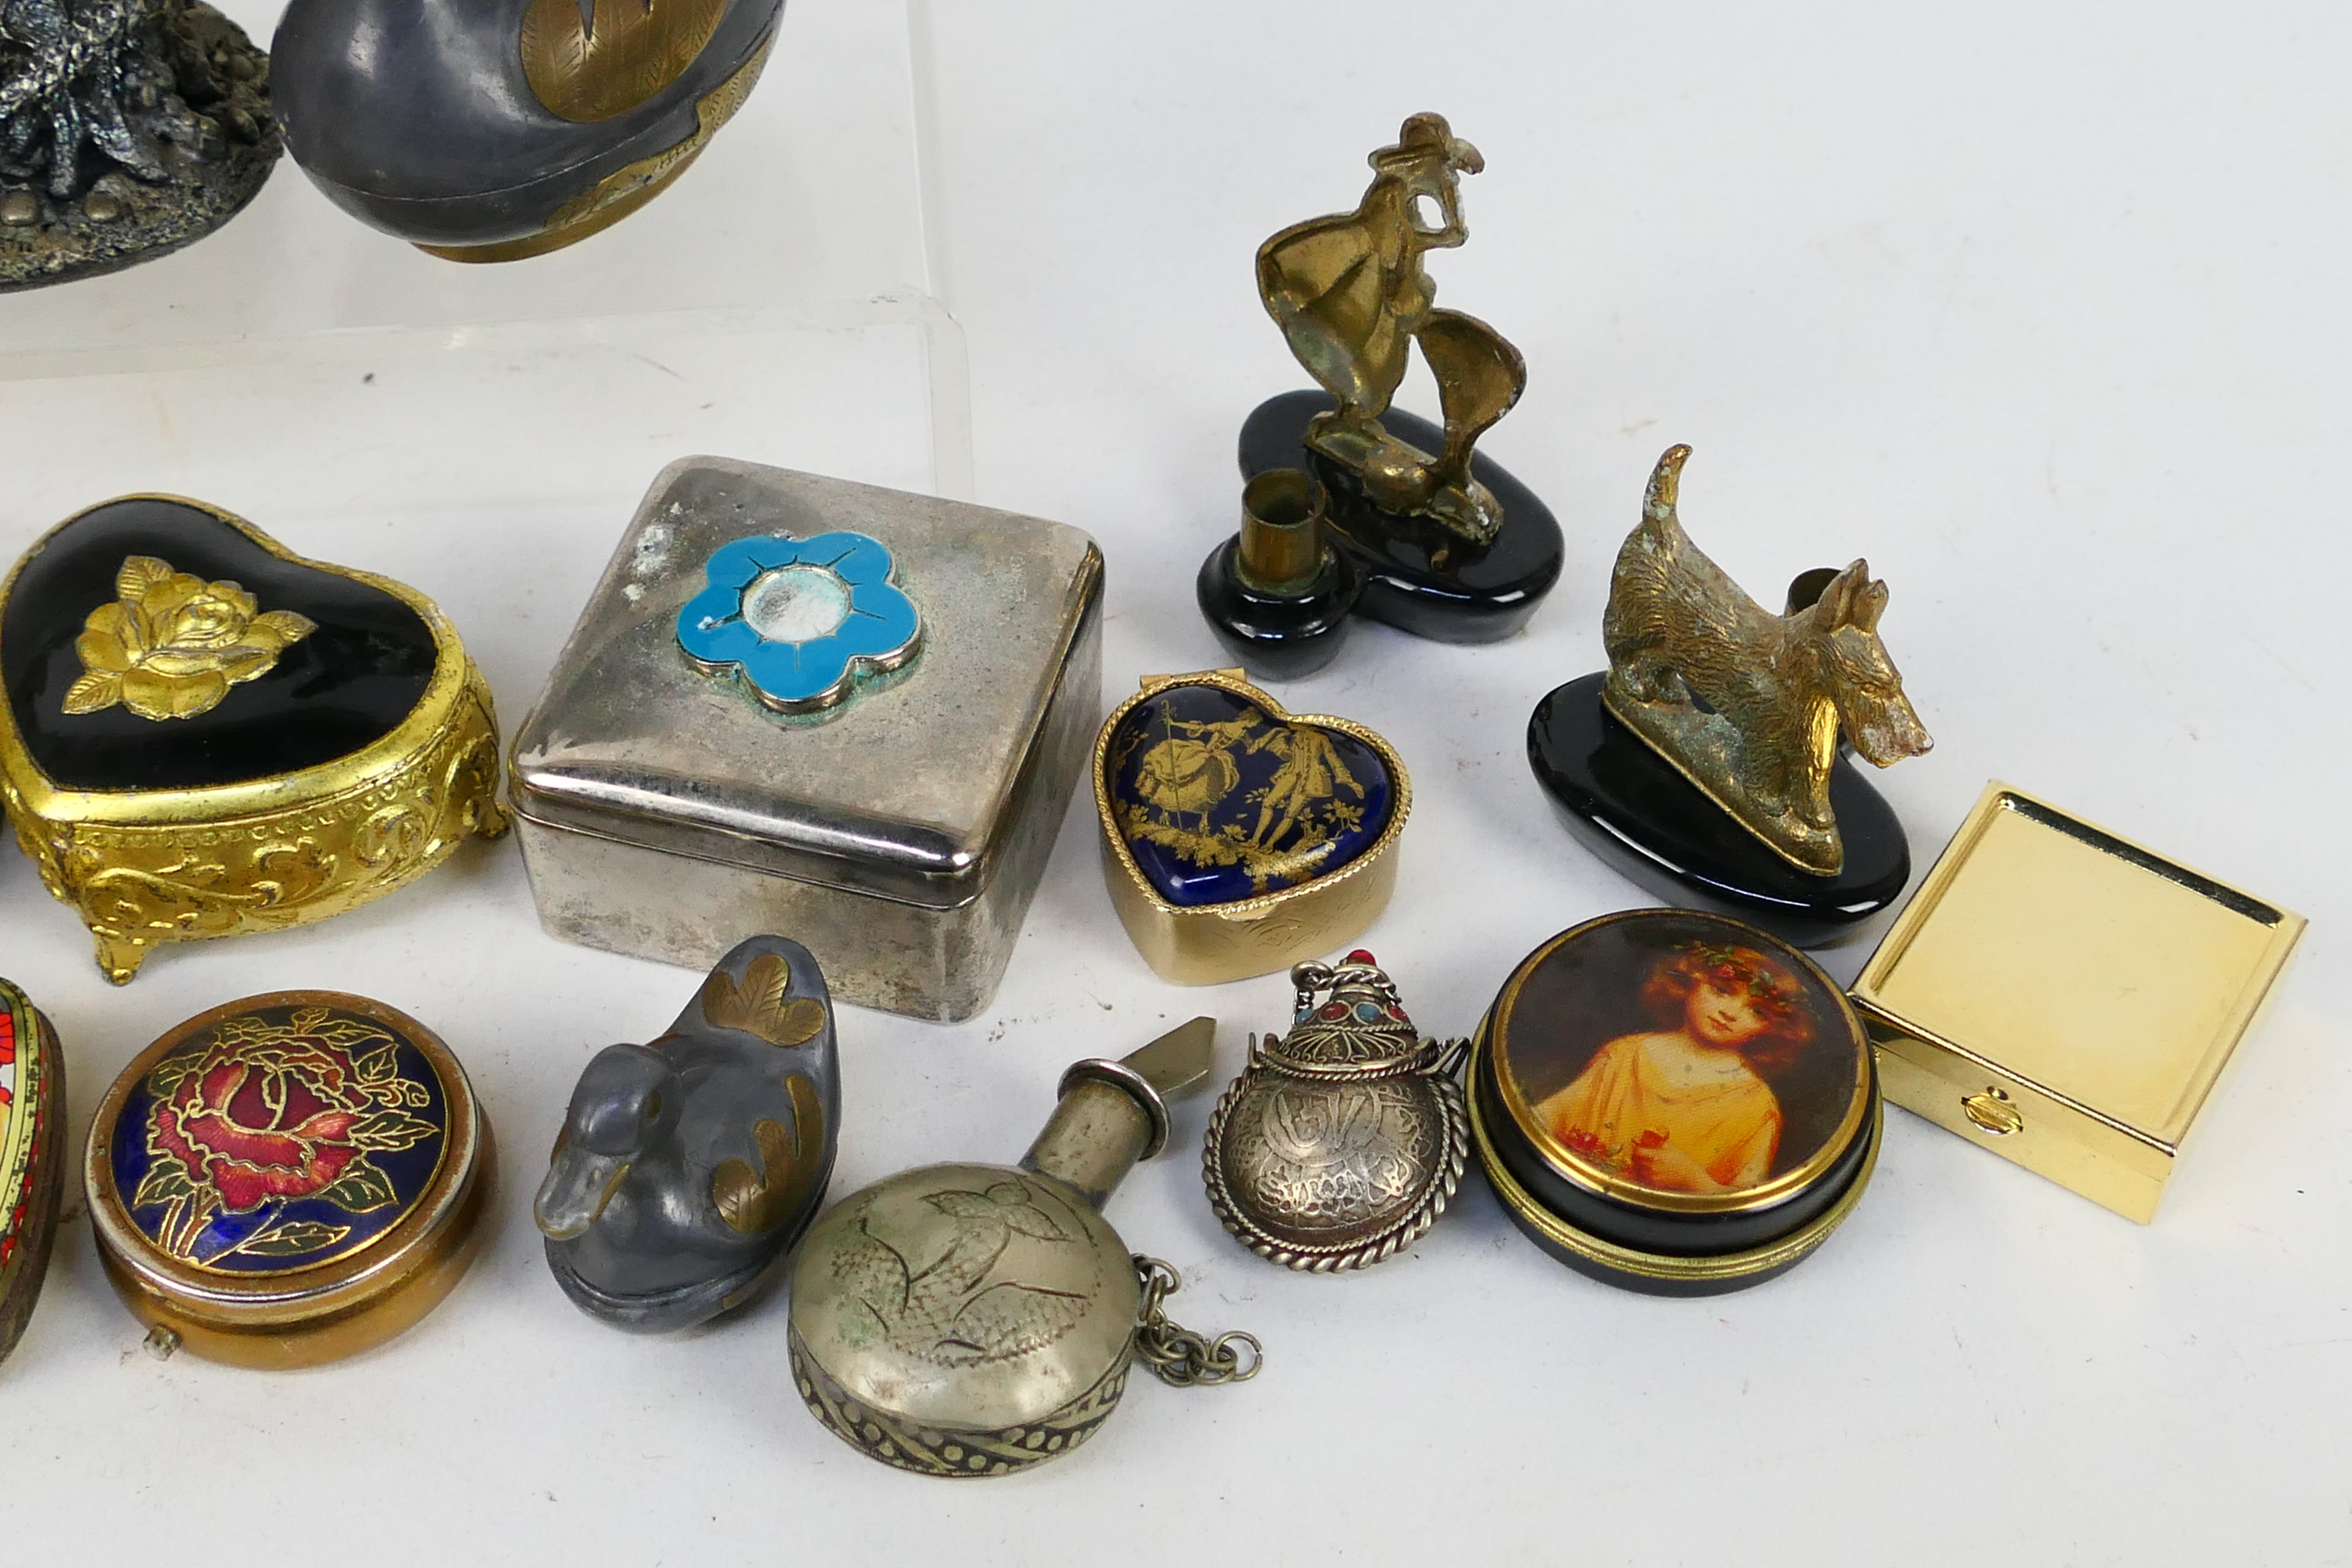 Small collectables to include trinket boxes, pill boxes, pewter dragon figure, - Image 6 of 6